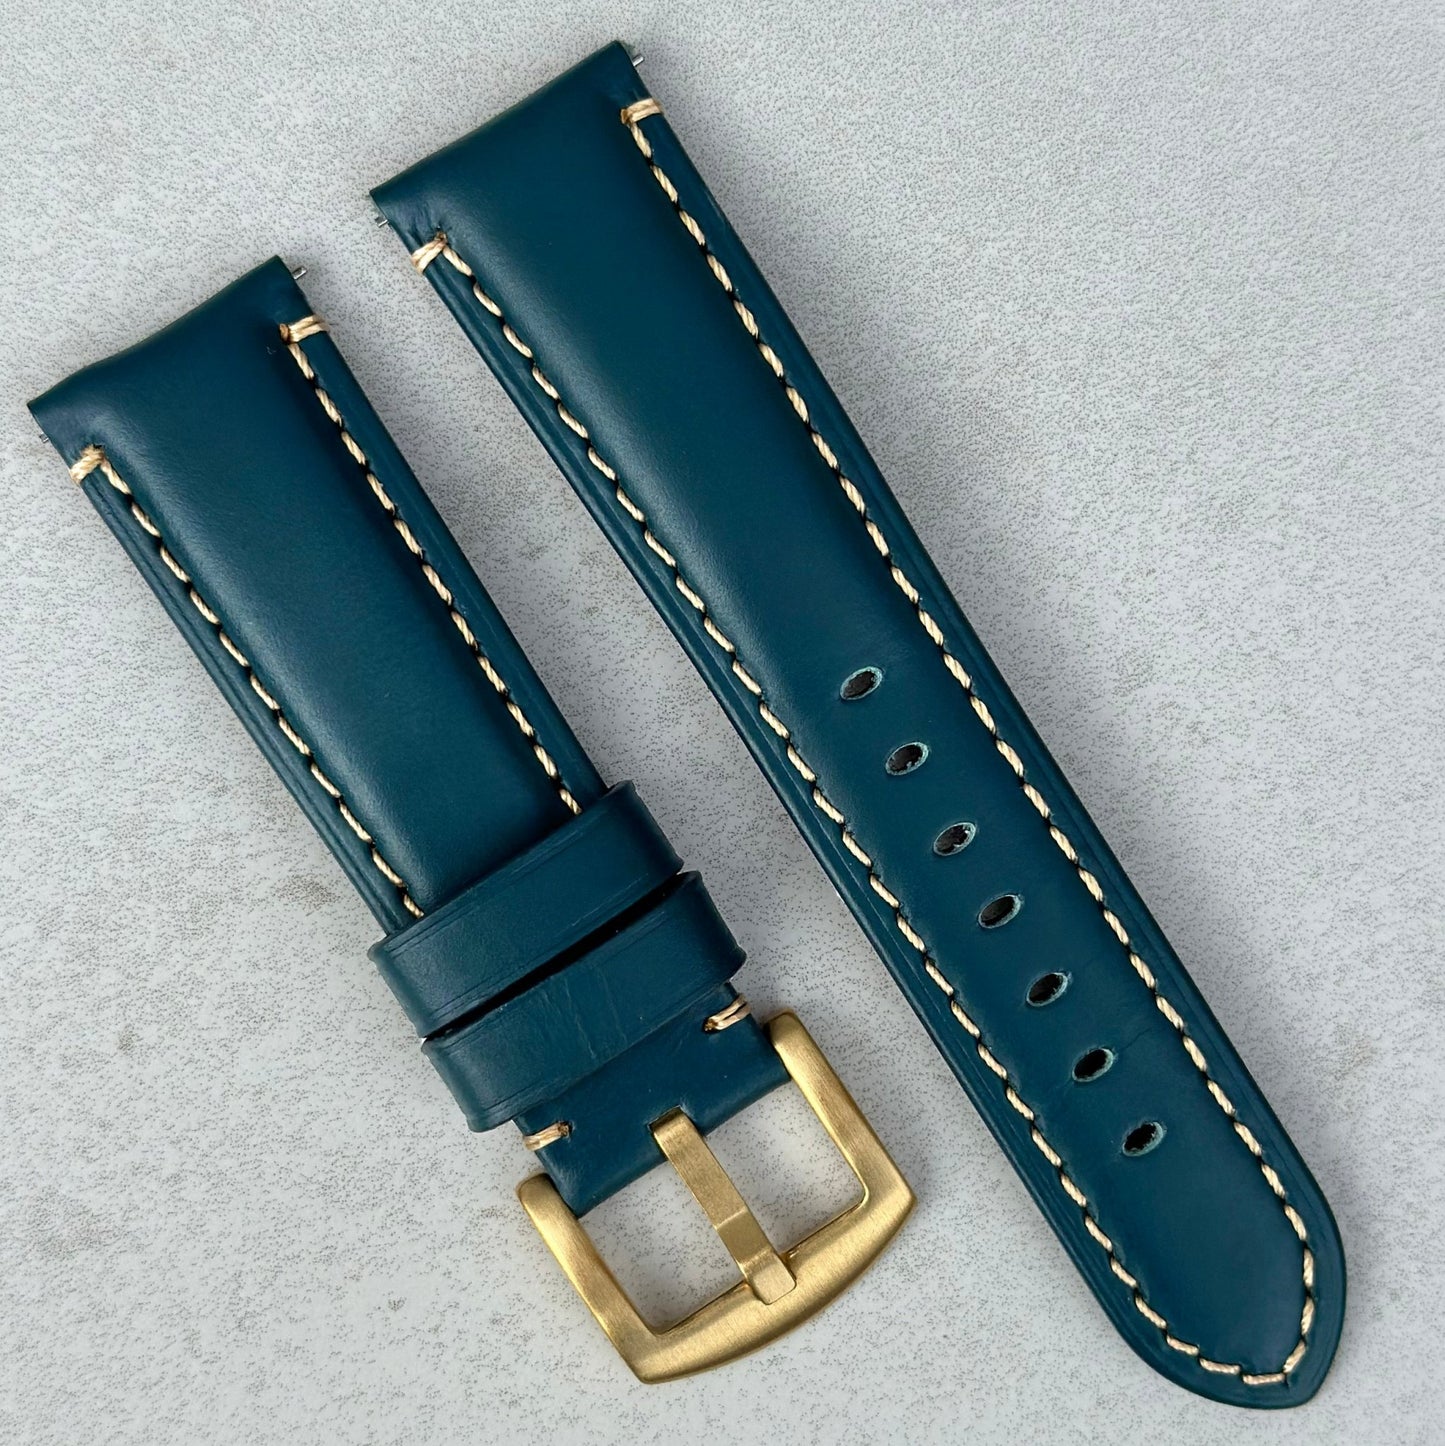 Oslo petrol blue leather watch strap with PVD gold 316L stainless steel buckle.